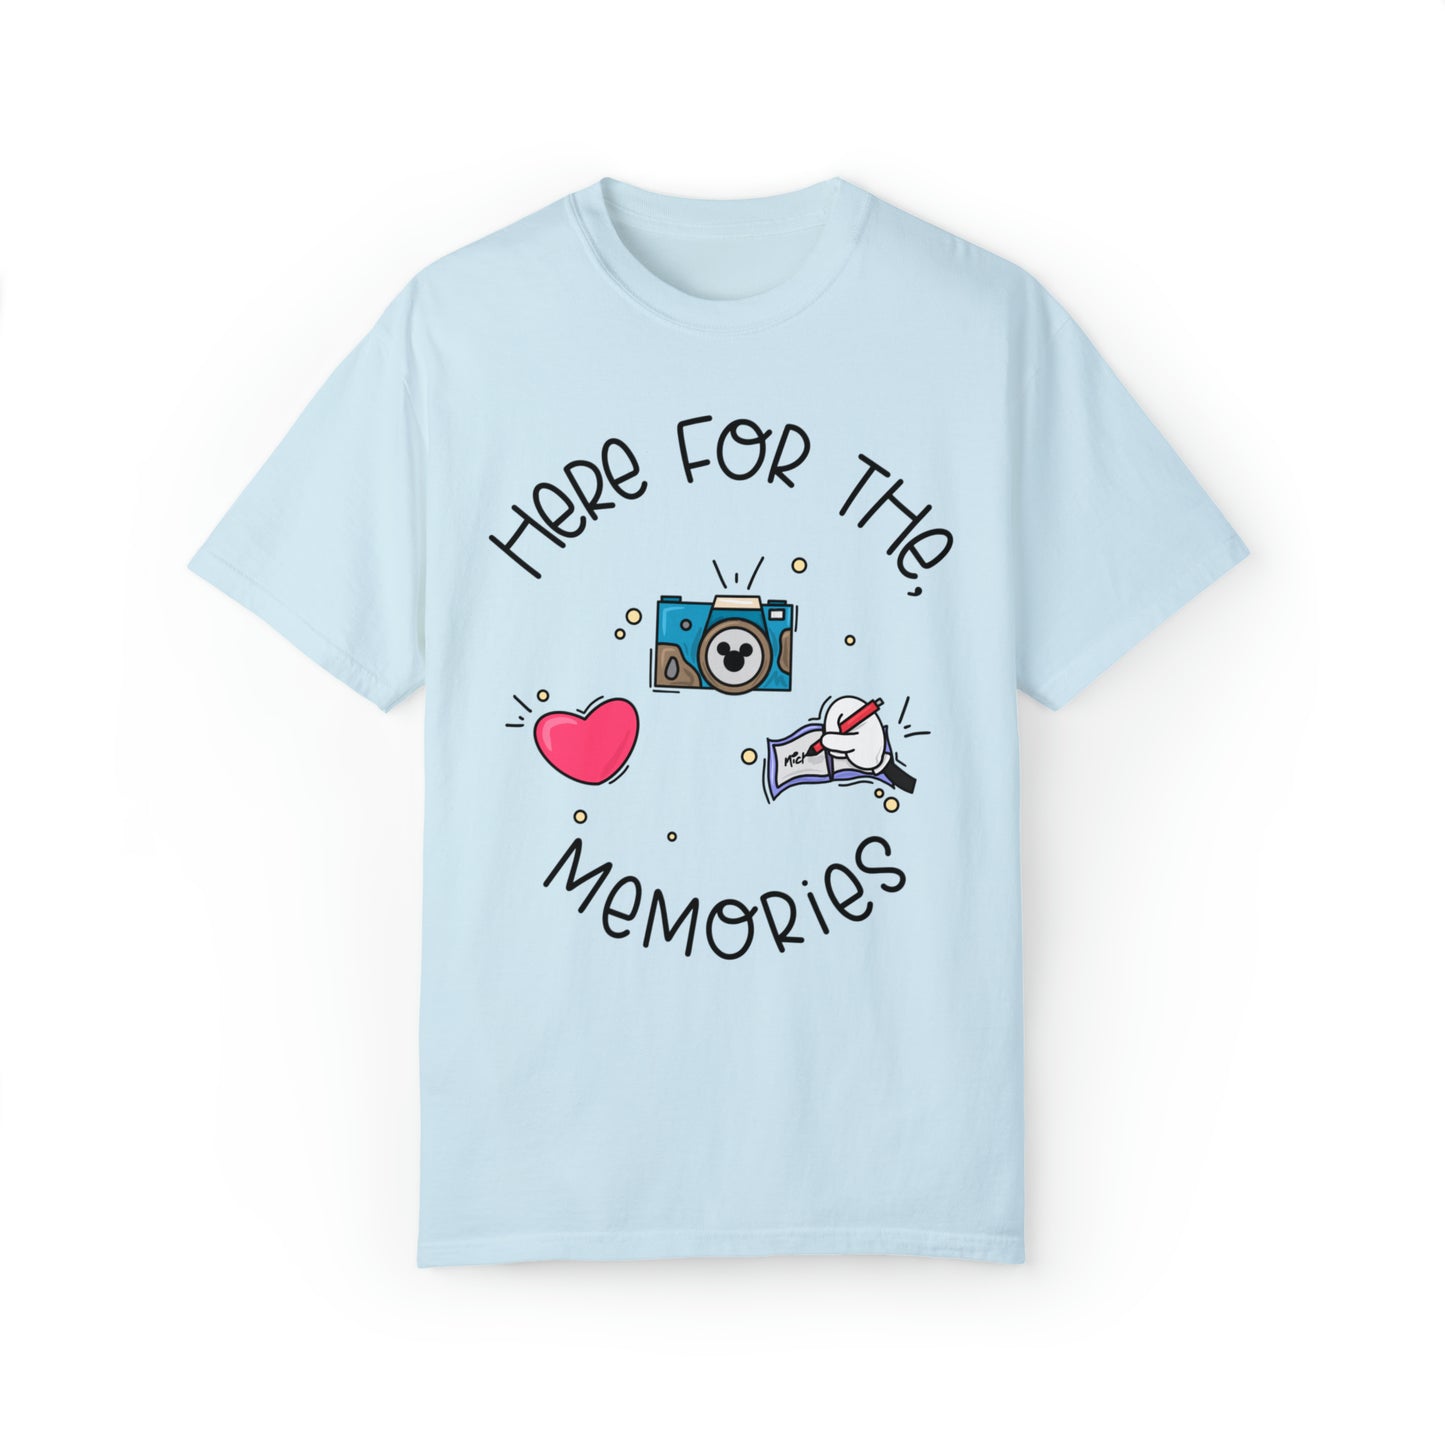 Adult Here for the Memories Tee - Comfort Colors